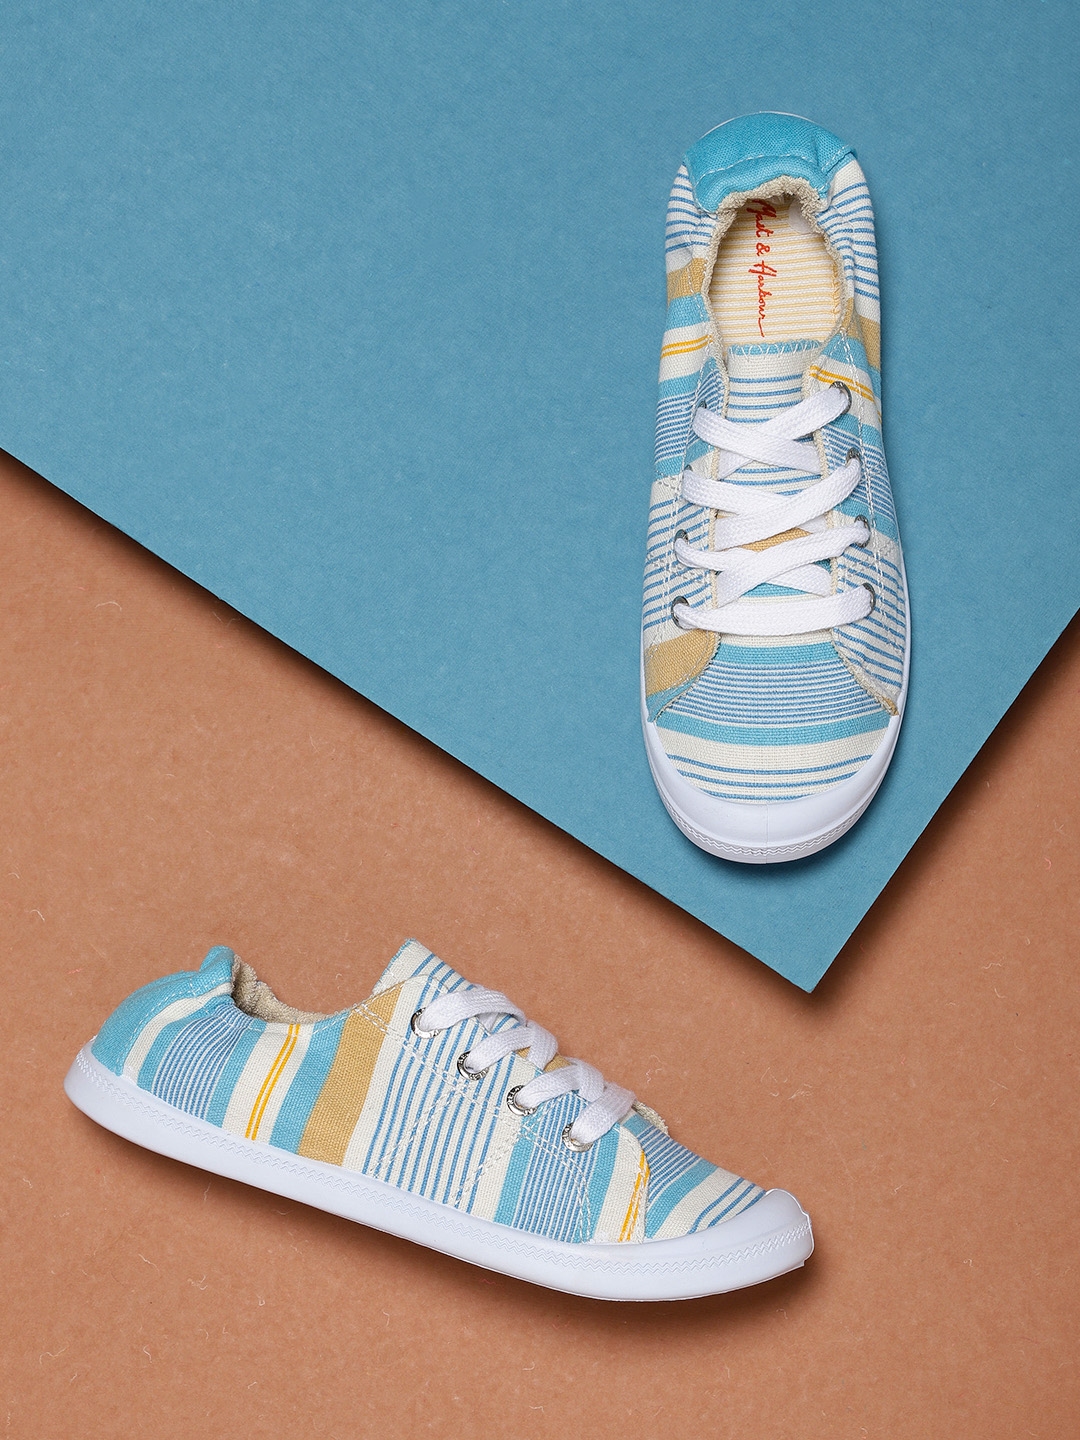 blue and white striped sneakers